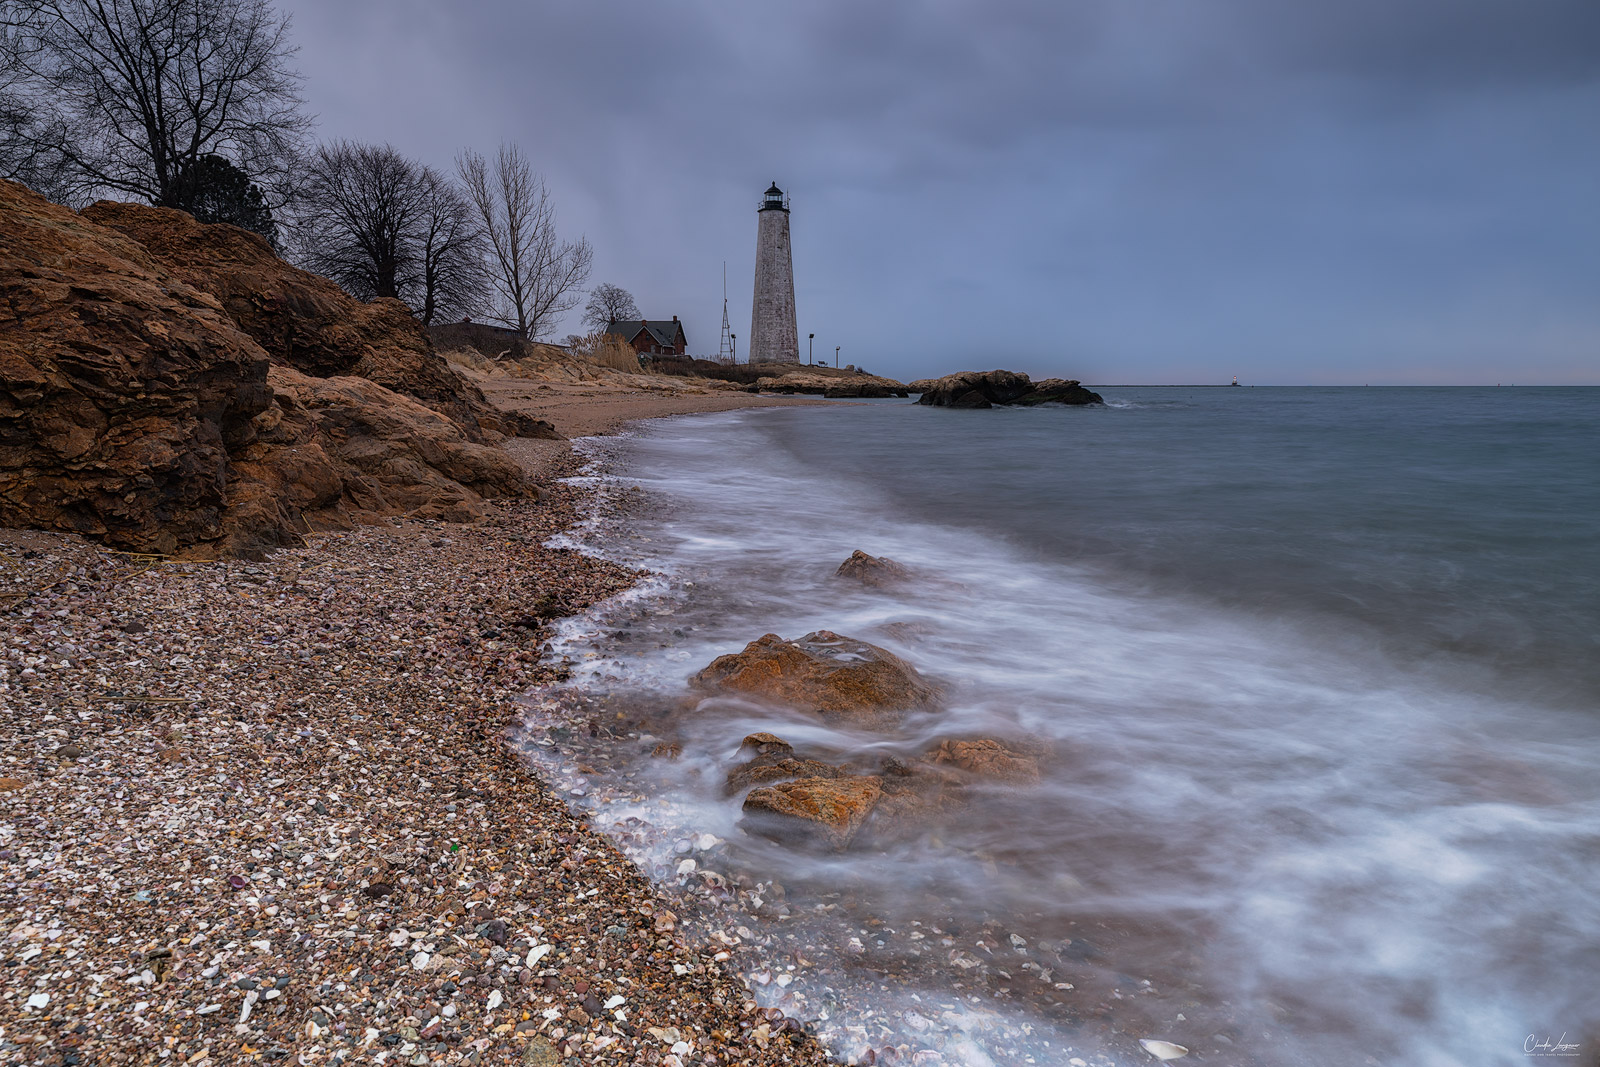 View of New Haven Harbor Lighthouse in New Haven in Connecticut.